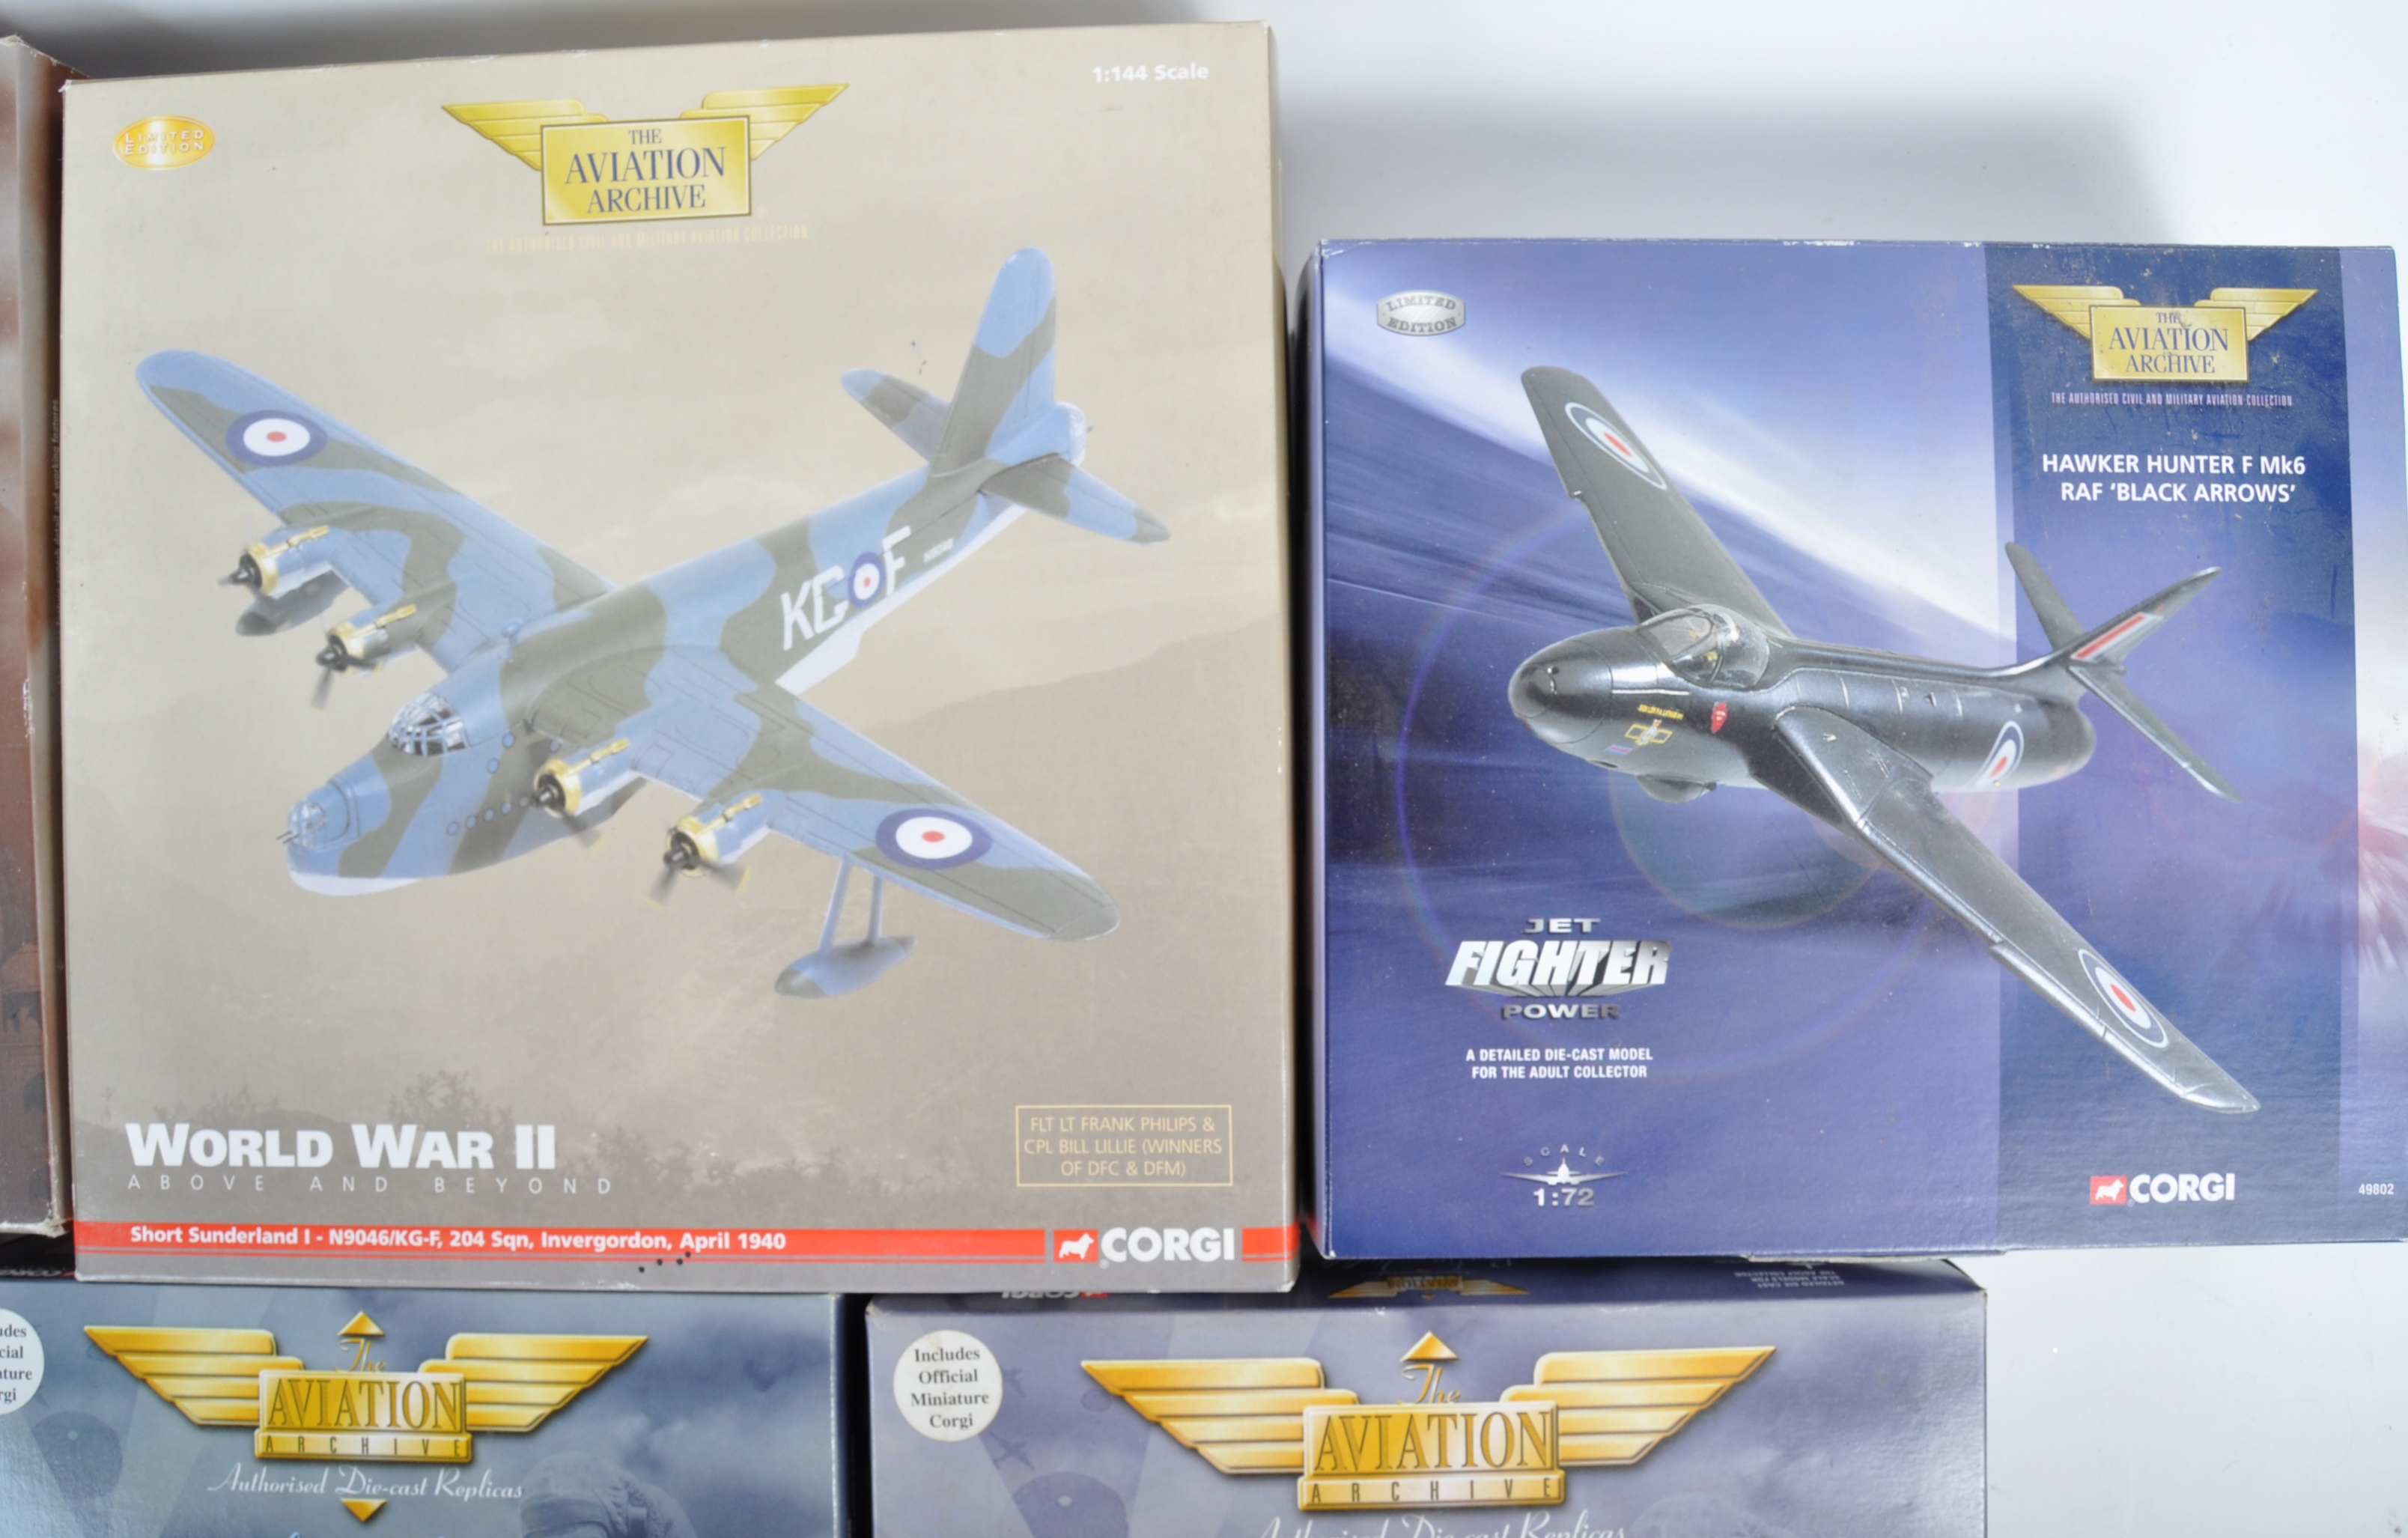 COLLECTION OF CORGI AVIATION ARCHIVE DIECAST MODEL PLANES - Image 4 of 7